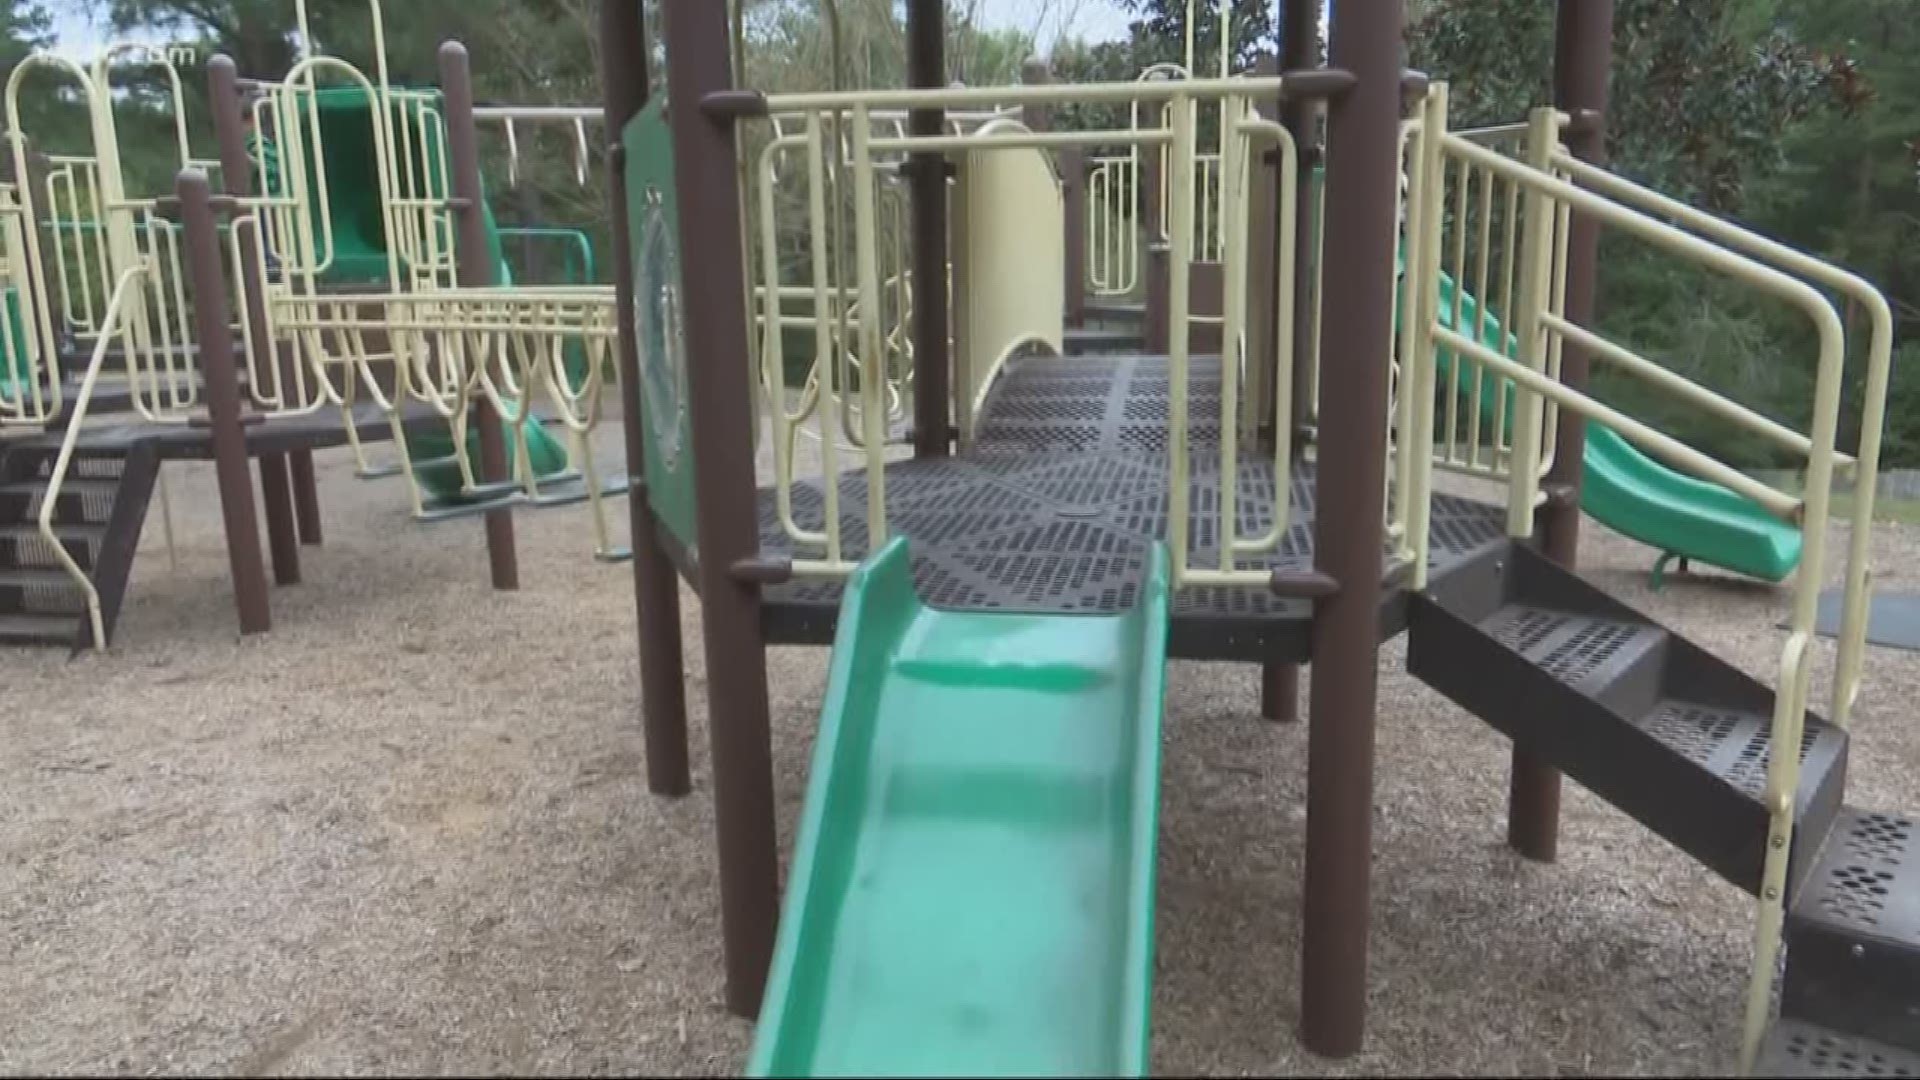 The park in Tega Cay will be replaced with inclusive play equipment. This allows children with or without disabilities to easily play together.